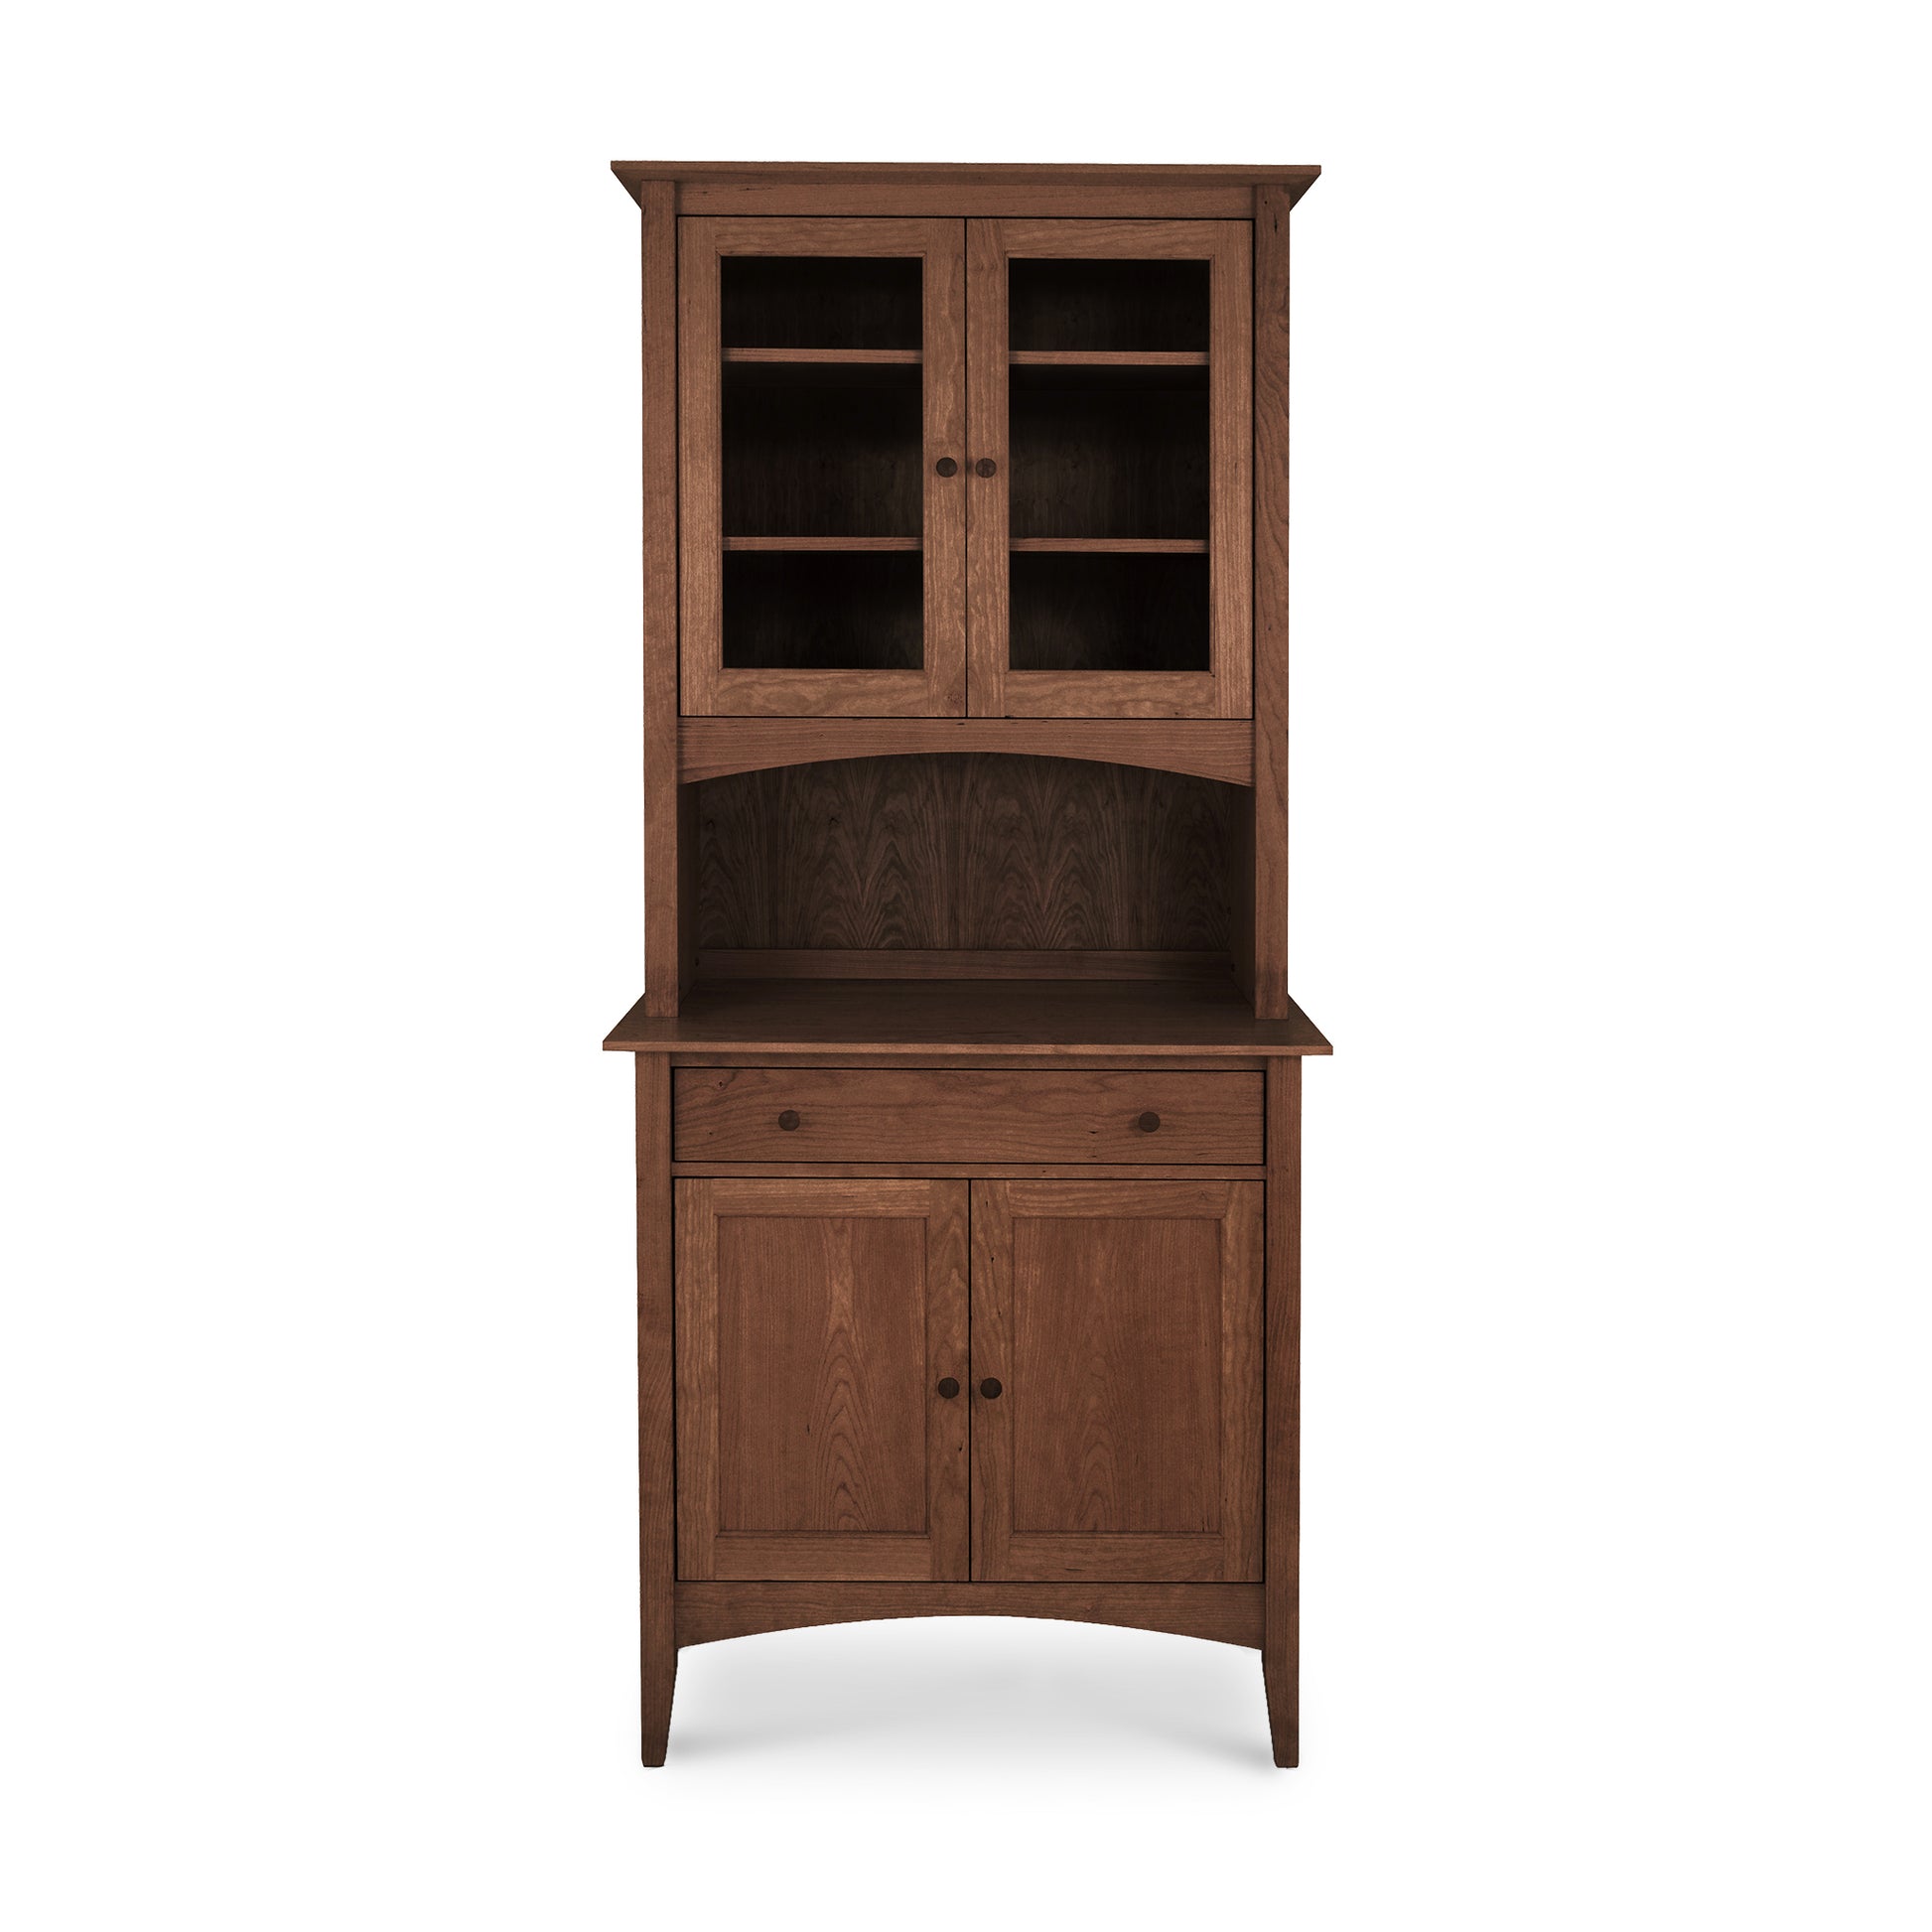 An Maple Corner Woodworks American Shaker Small 38" China Cabinet with an upper section sporting two glass-paneled doors and a lower cabinet section boasting two solid doors, against a white background. This piece is characterized by its solid hardwood construction.